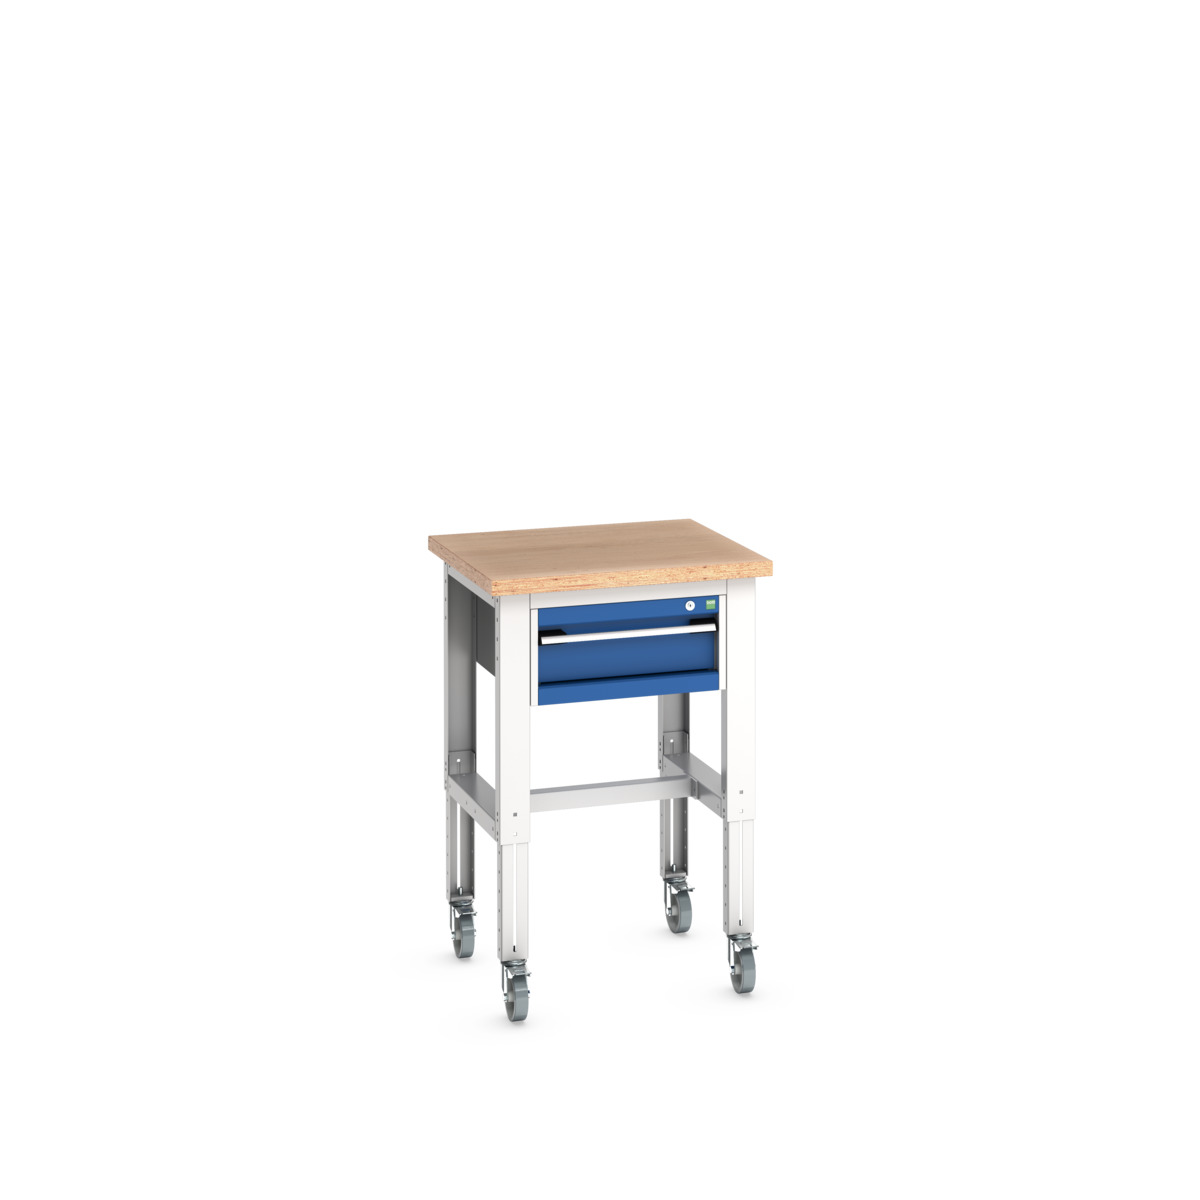 41003271.11V - cubio mobile bench adj height (mpx)